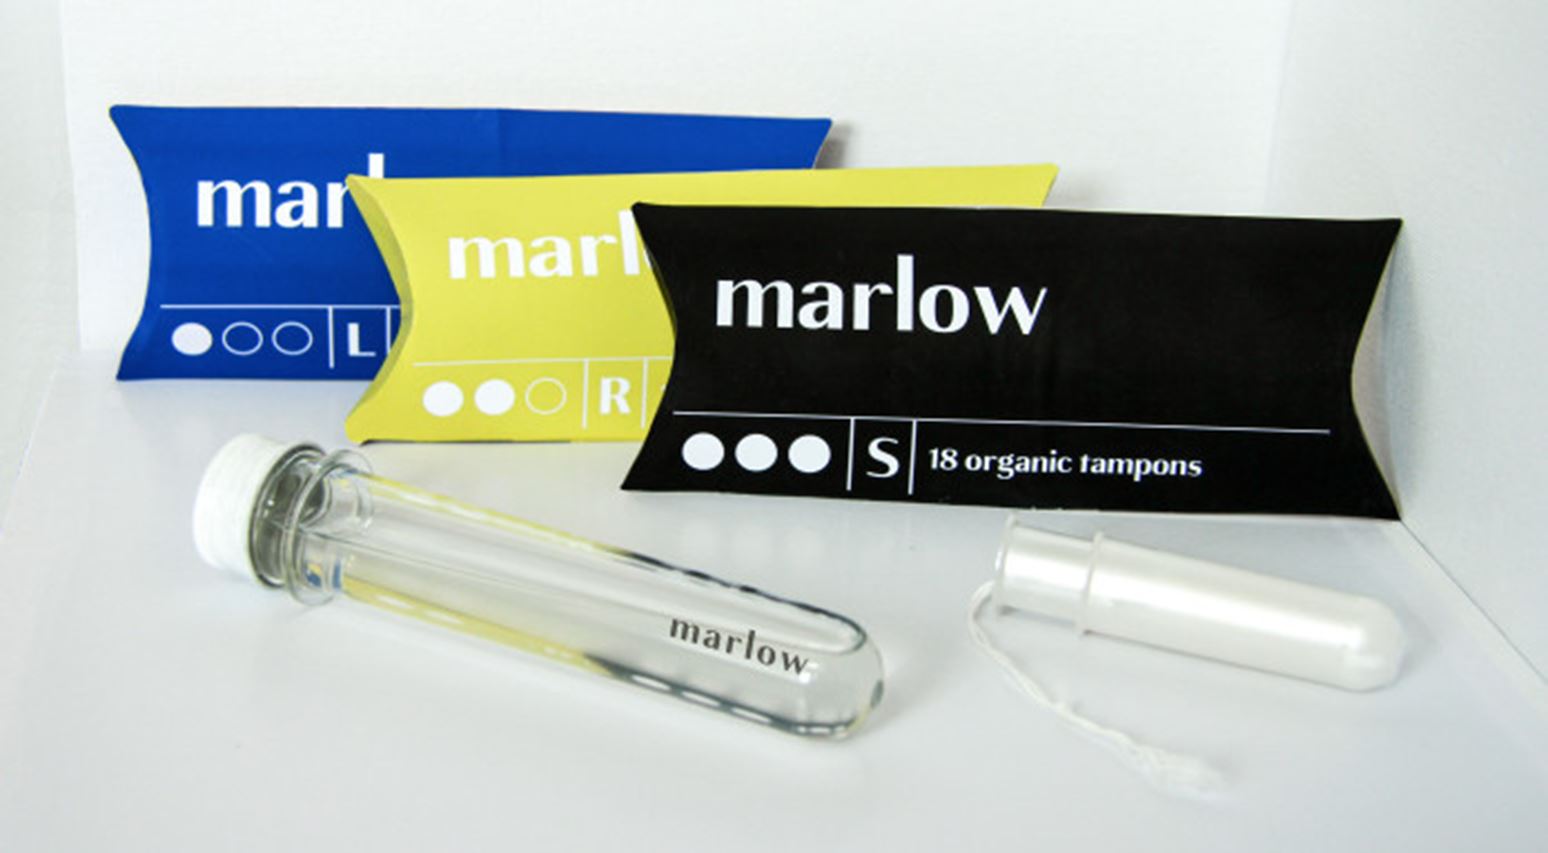 Marlow - Making the ultimate reproductive health brand